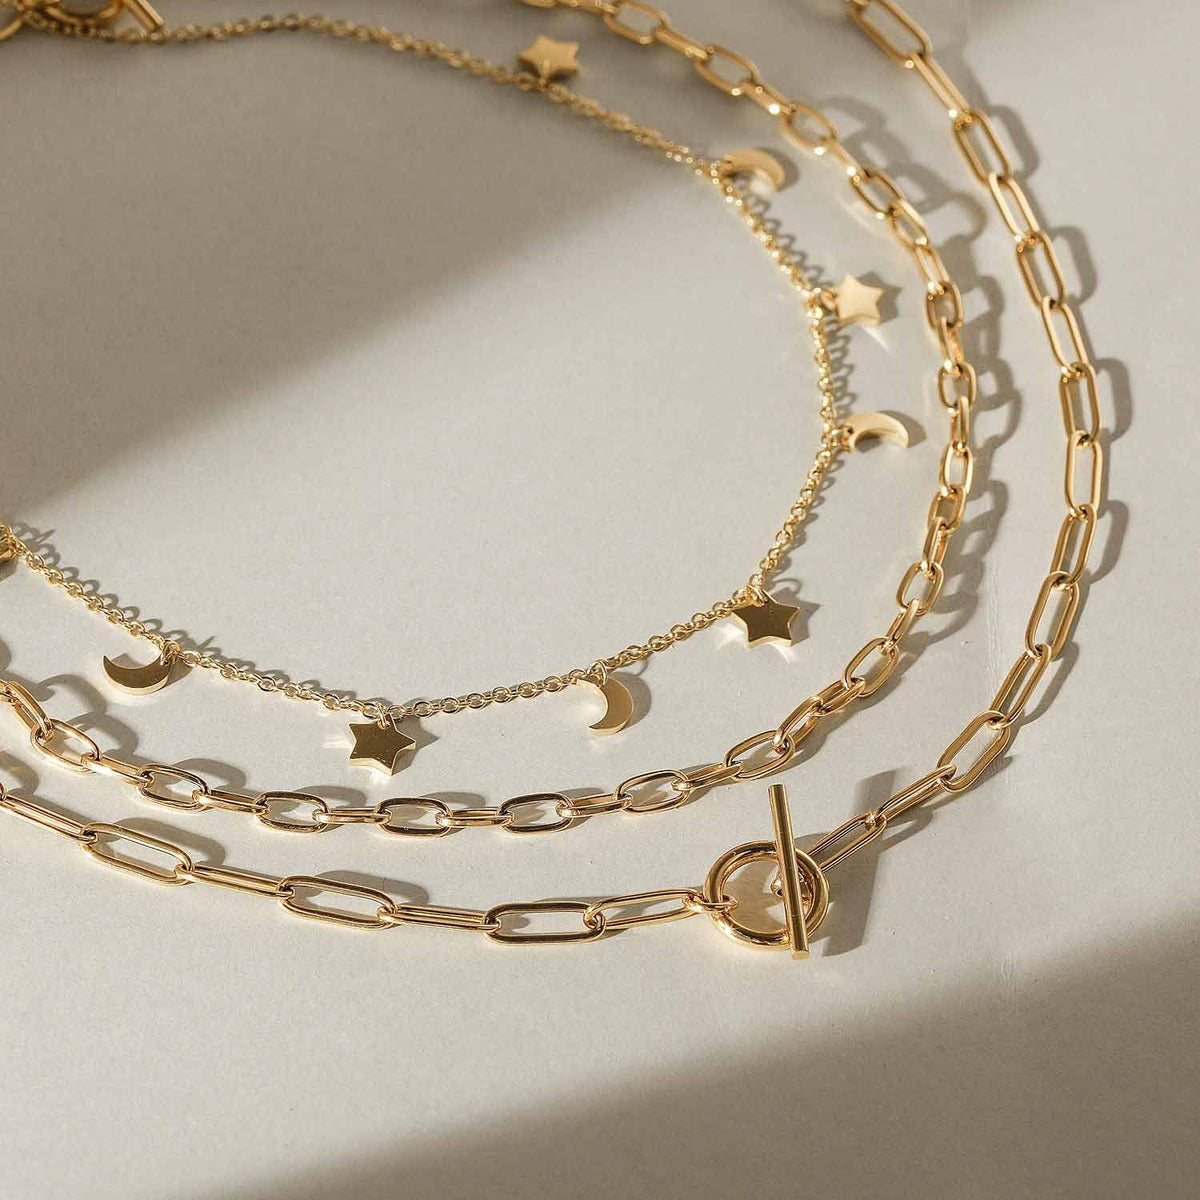 Louis Vuitton Gold Layered Necklace